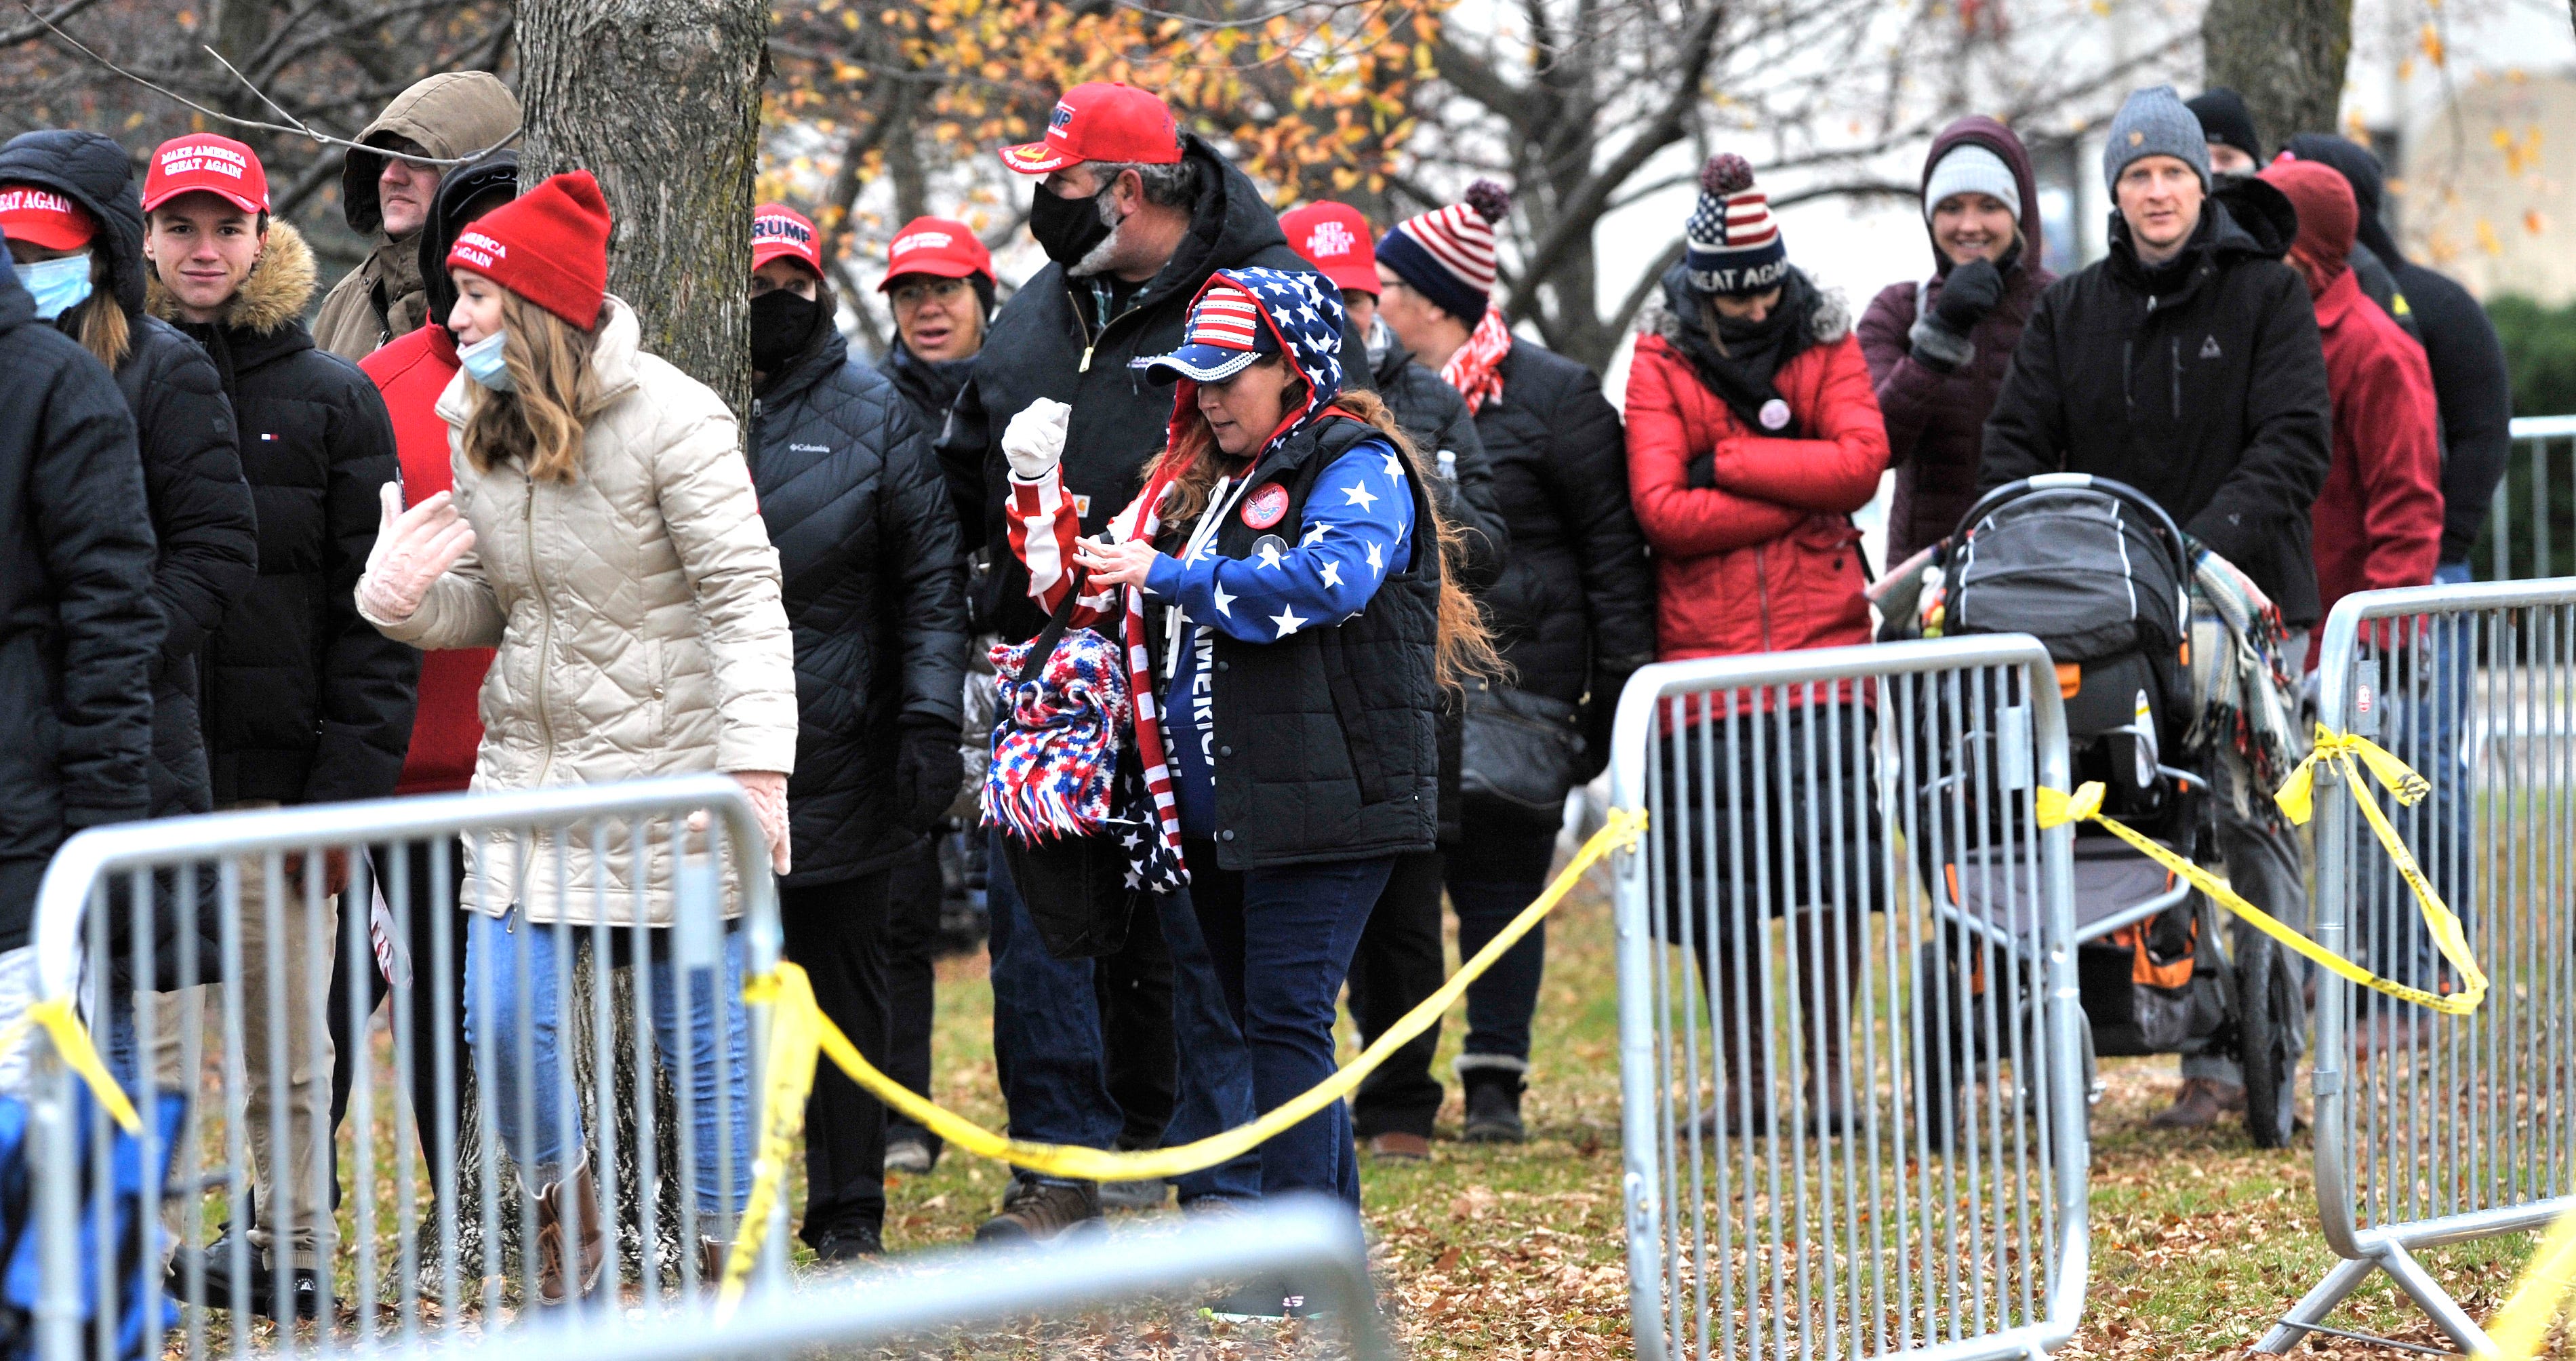 Supporters wait to enter through Secret Service security before U.S. President Donald Trump arrives at the Oakland International Airport in Waterford Twp., Friday, October 30, 2020, for his Make America Great Again Victory Rally.